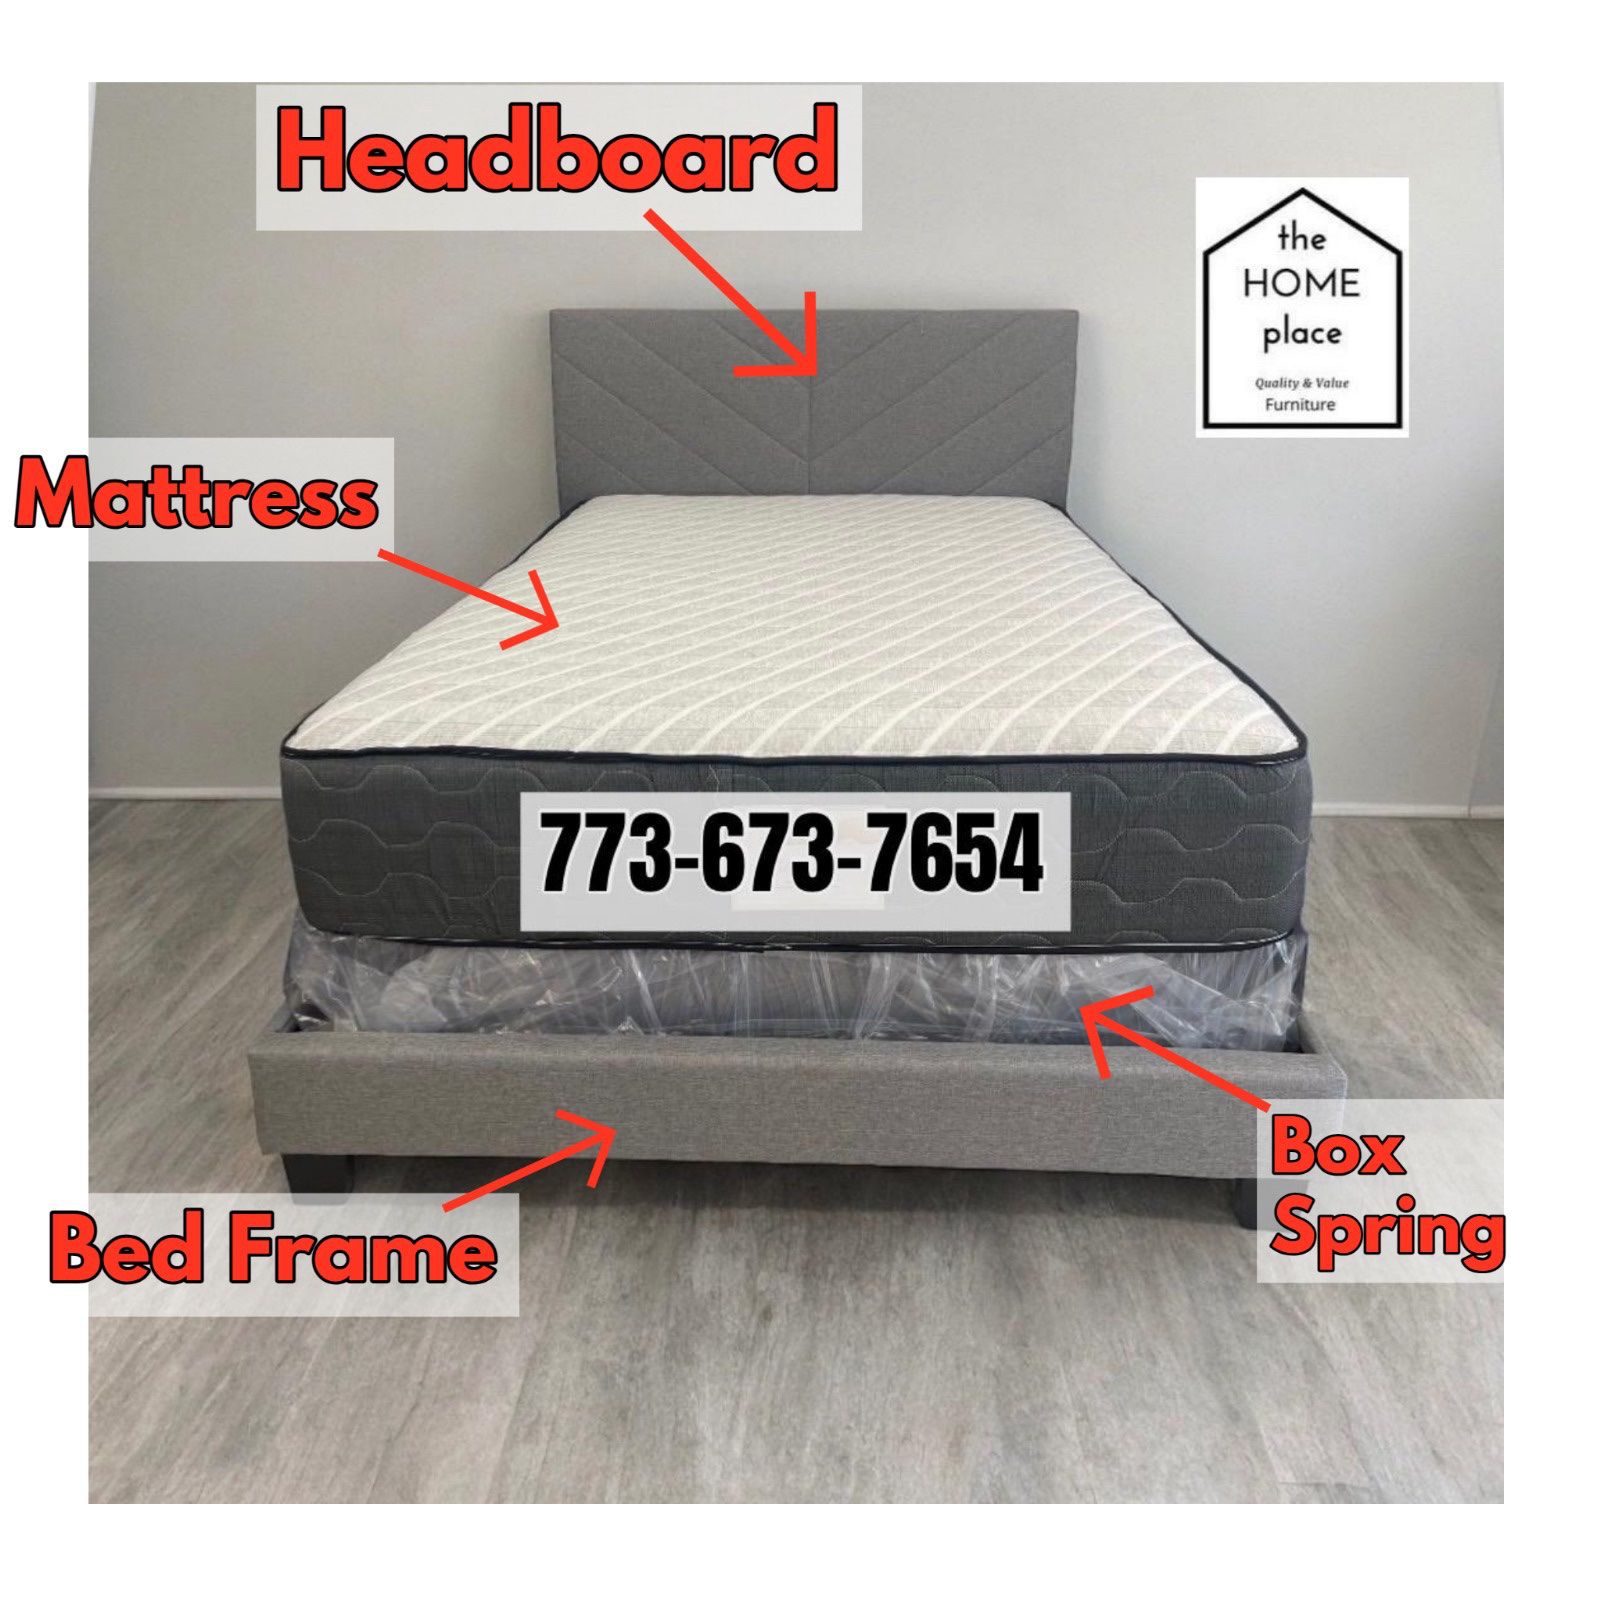 Comfy & Elegant King Bed Frame 🚨 Includes Mattress & Box Spring for ONLY $449.  Ready for Delivery Today 🚛